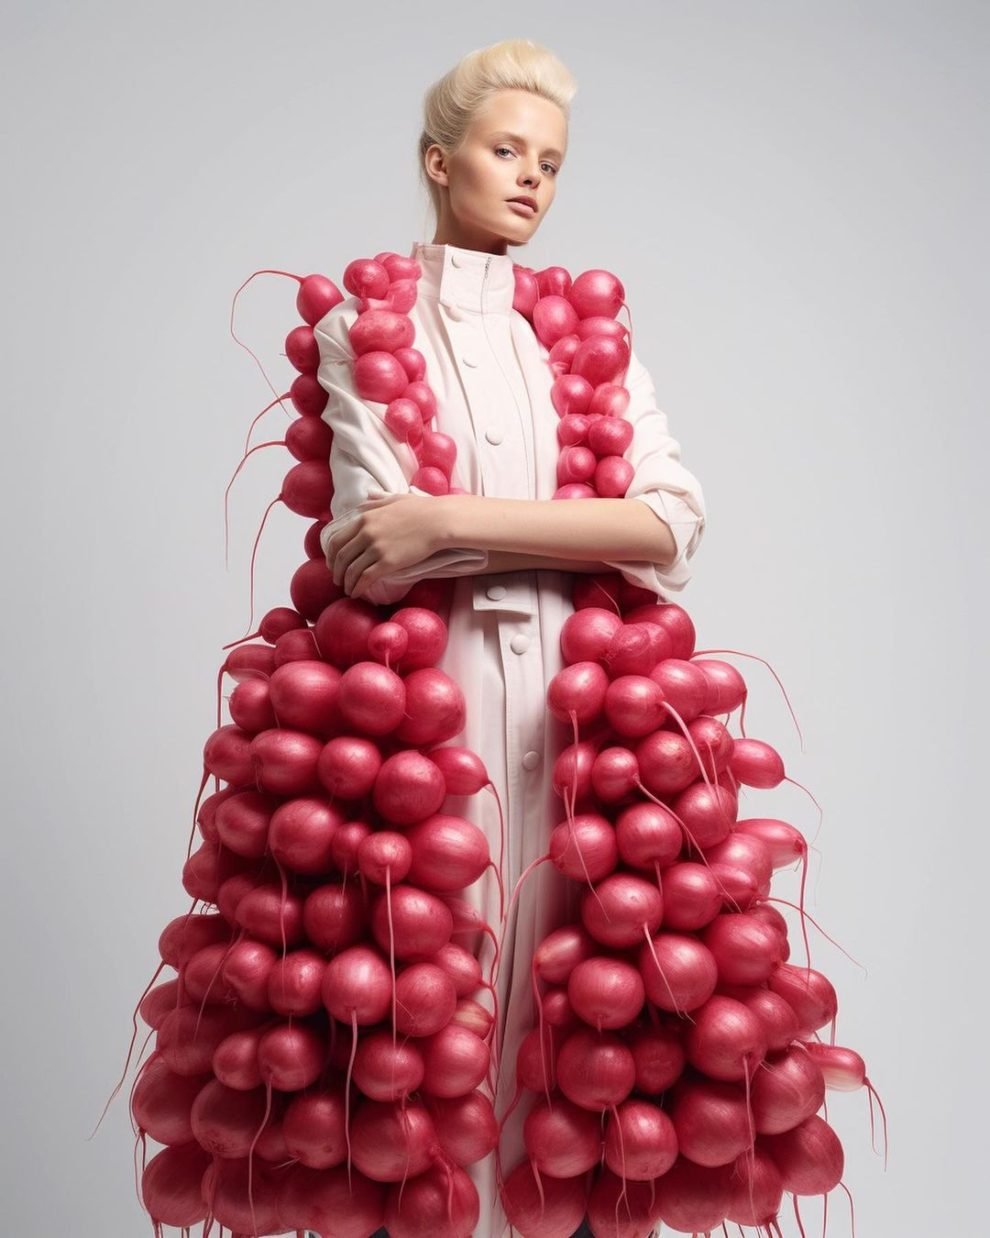 Artist Bonny Carrera Creates Imaginative AI-Generated Chairs Inspired By  Fruits And Veggies